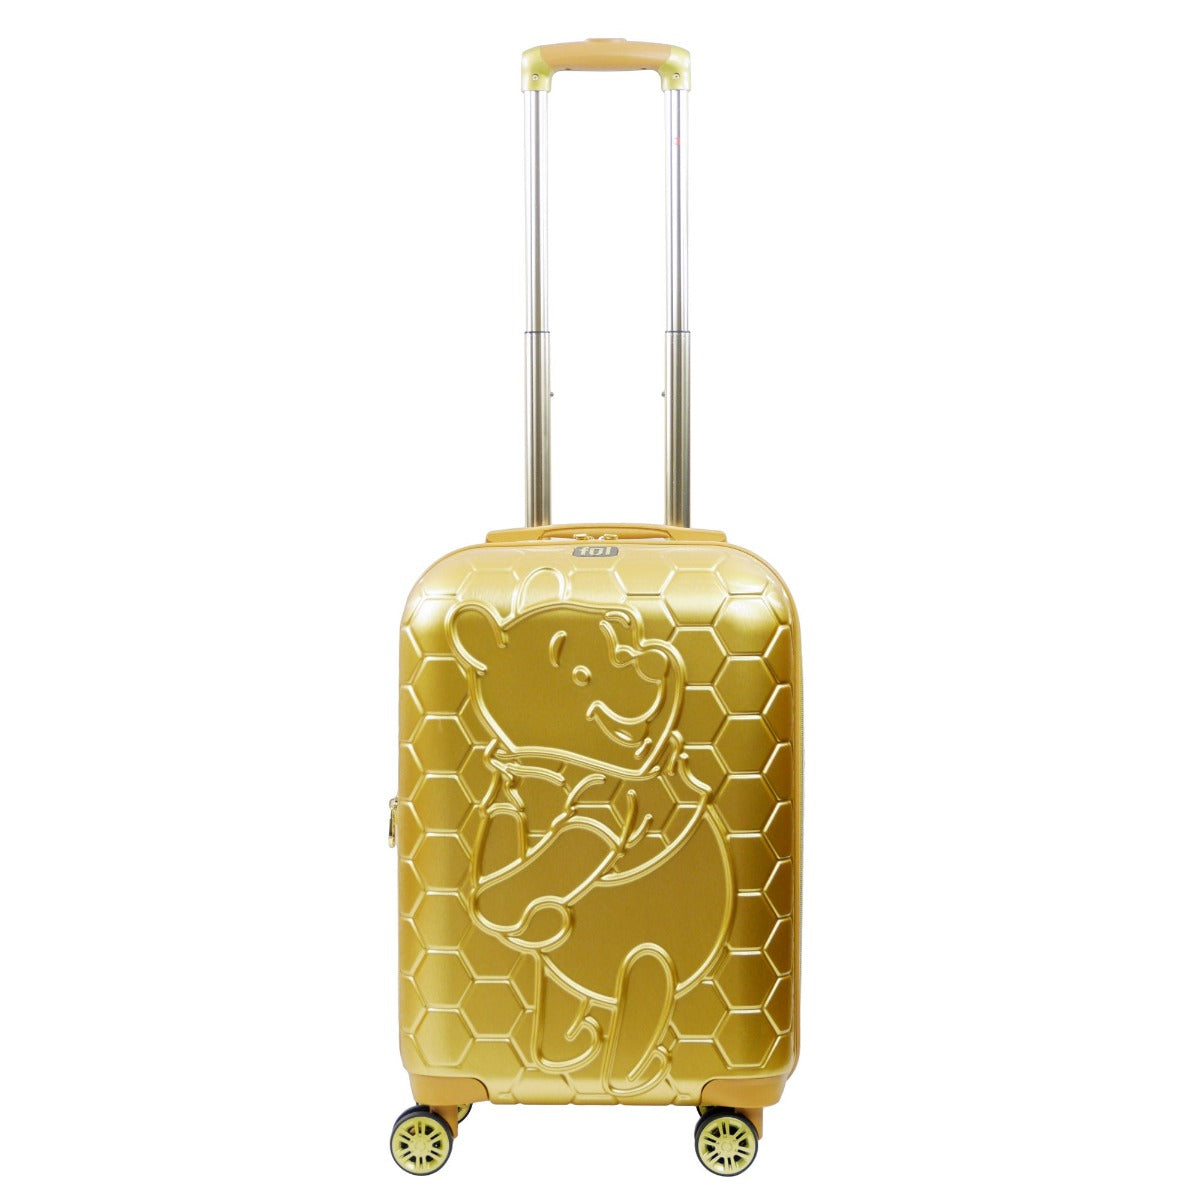 Gold Disney Winnie the Pooh 22.5" hardside spinner suitcase - best hard side kids luggage for travel